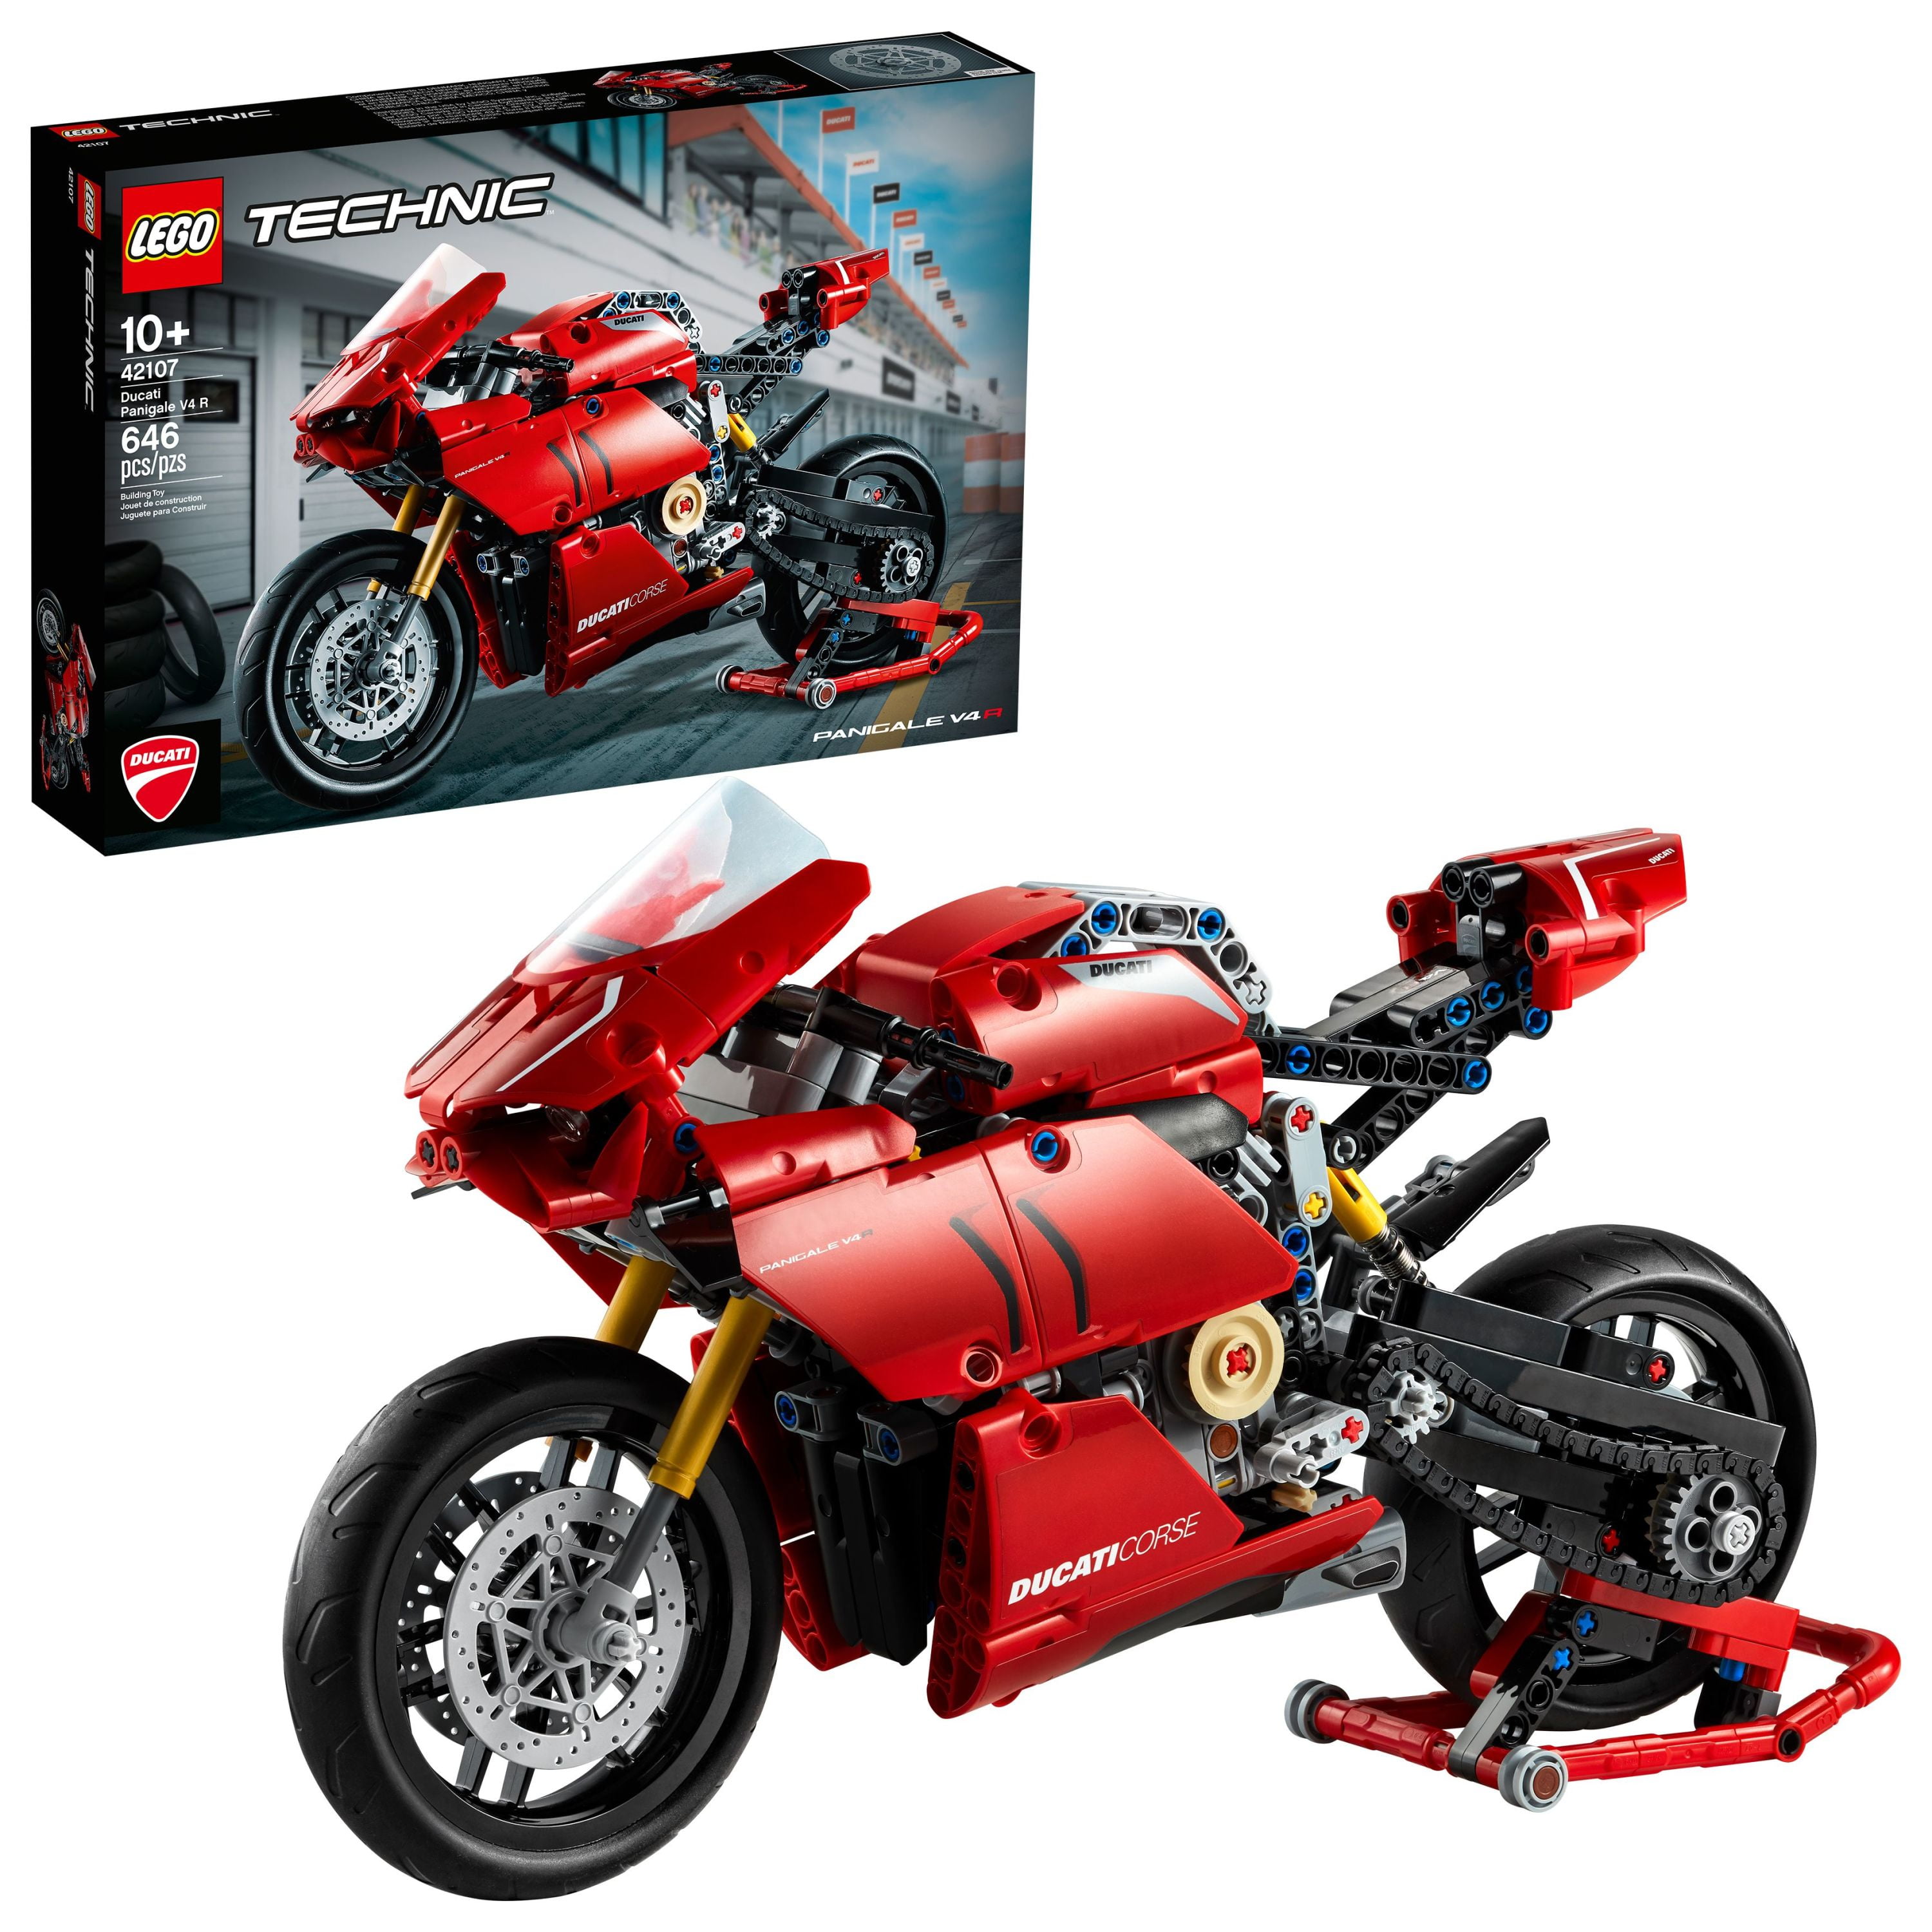 LEGO Technic Ducati Panigale V4 R Motorcycle 42107, Collectible Superbike Display Model Kit with Gearbox and Suspension, Gift Idea - Walmart.com